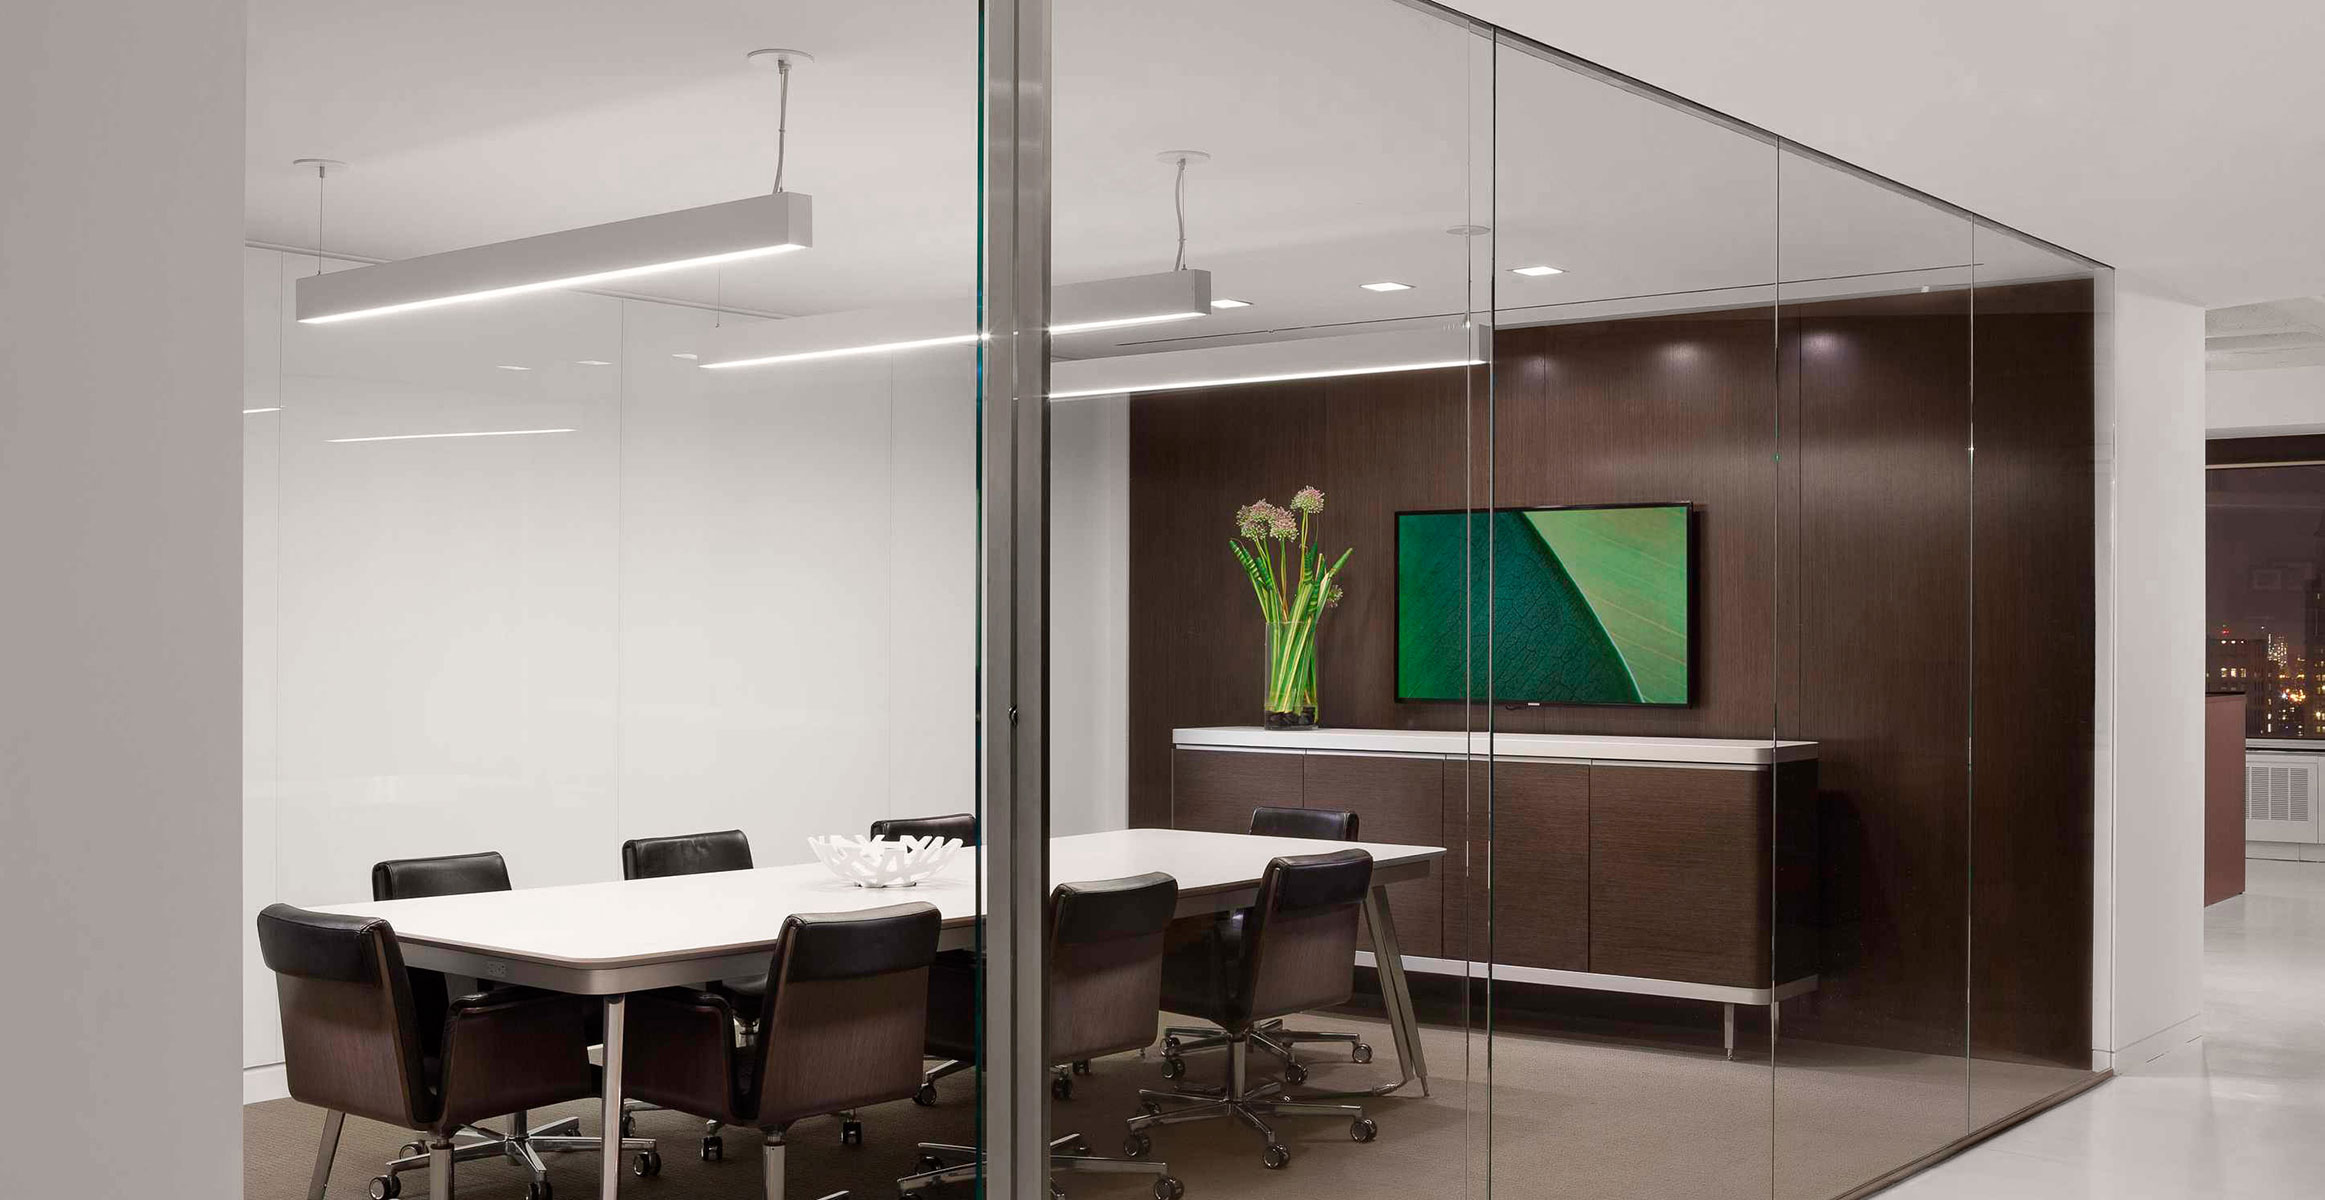 Glass conference room sliding doors with vertical stainless steel pulls